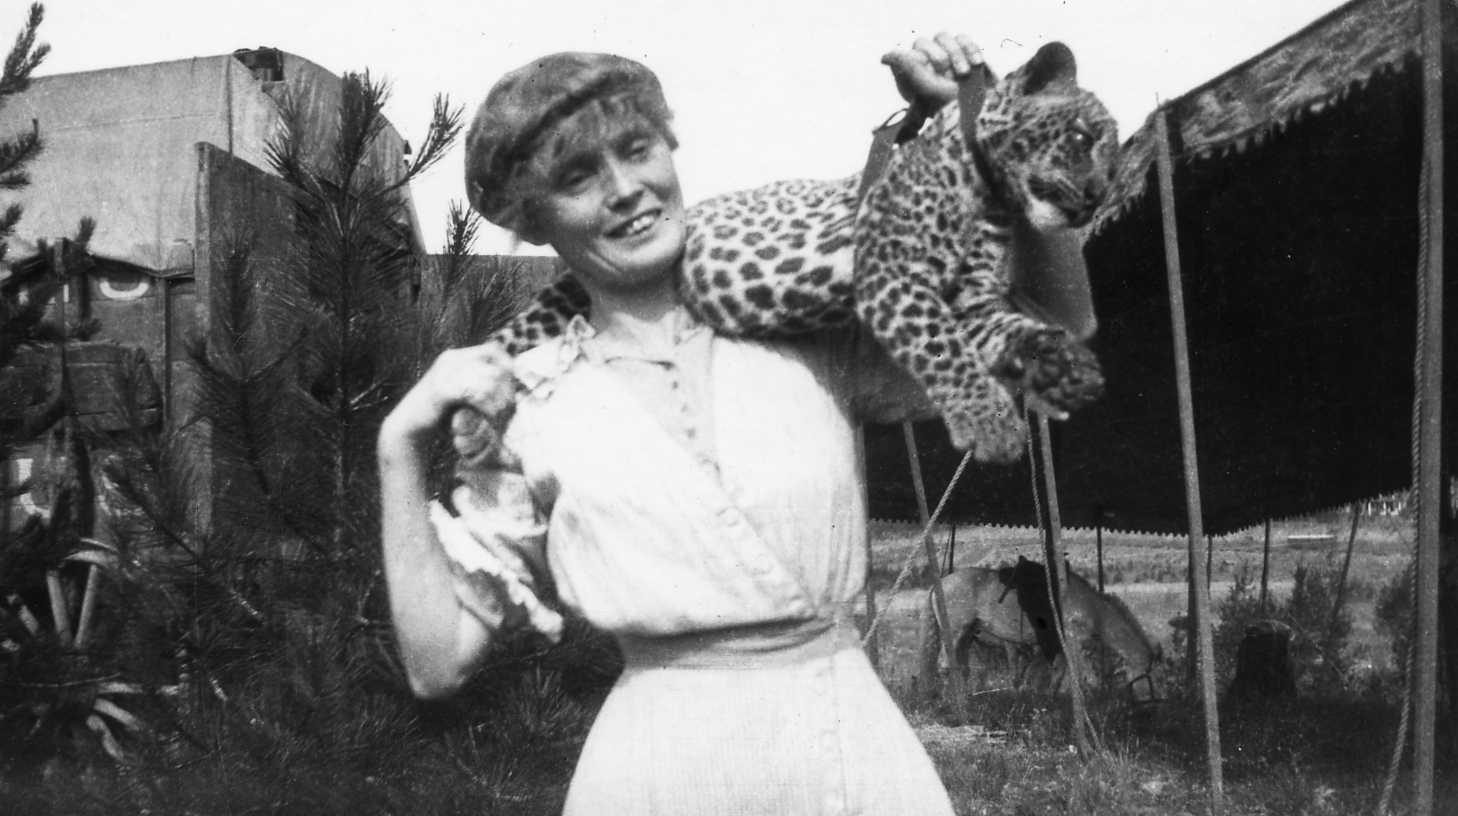 Mabel Stark with a leopard. Mabel, Mabel, Tiger Trainer tells the story of Starks amazing career.